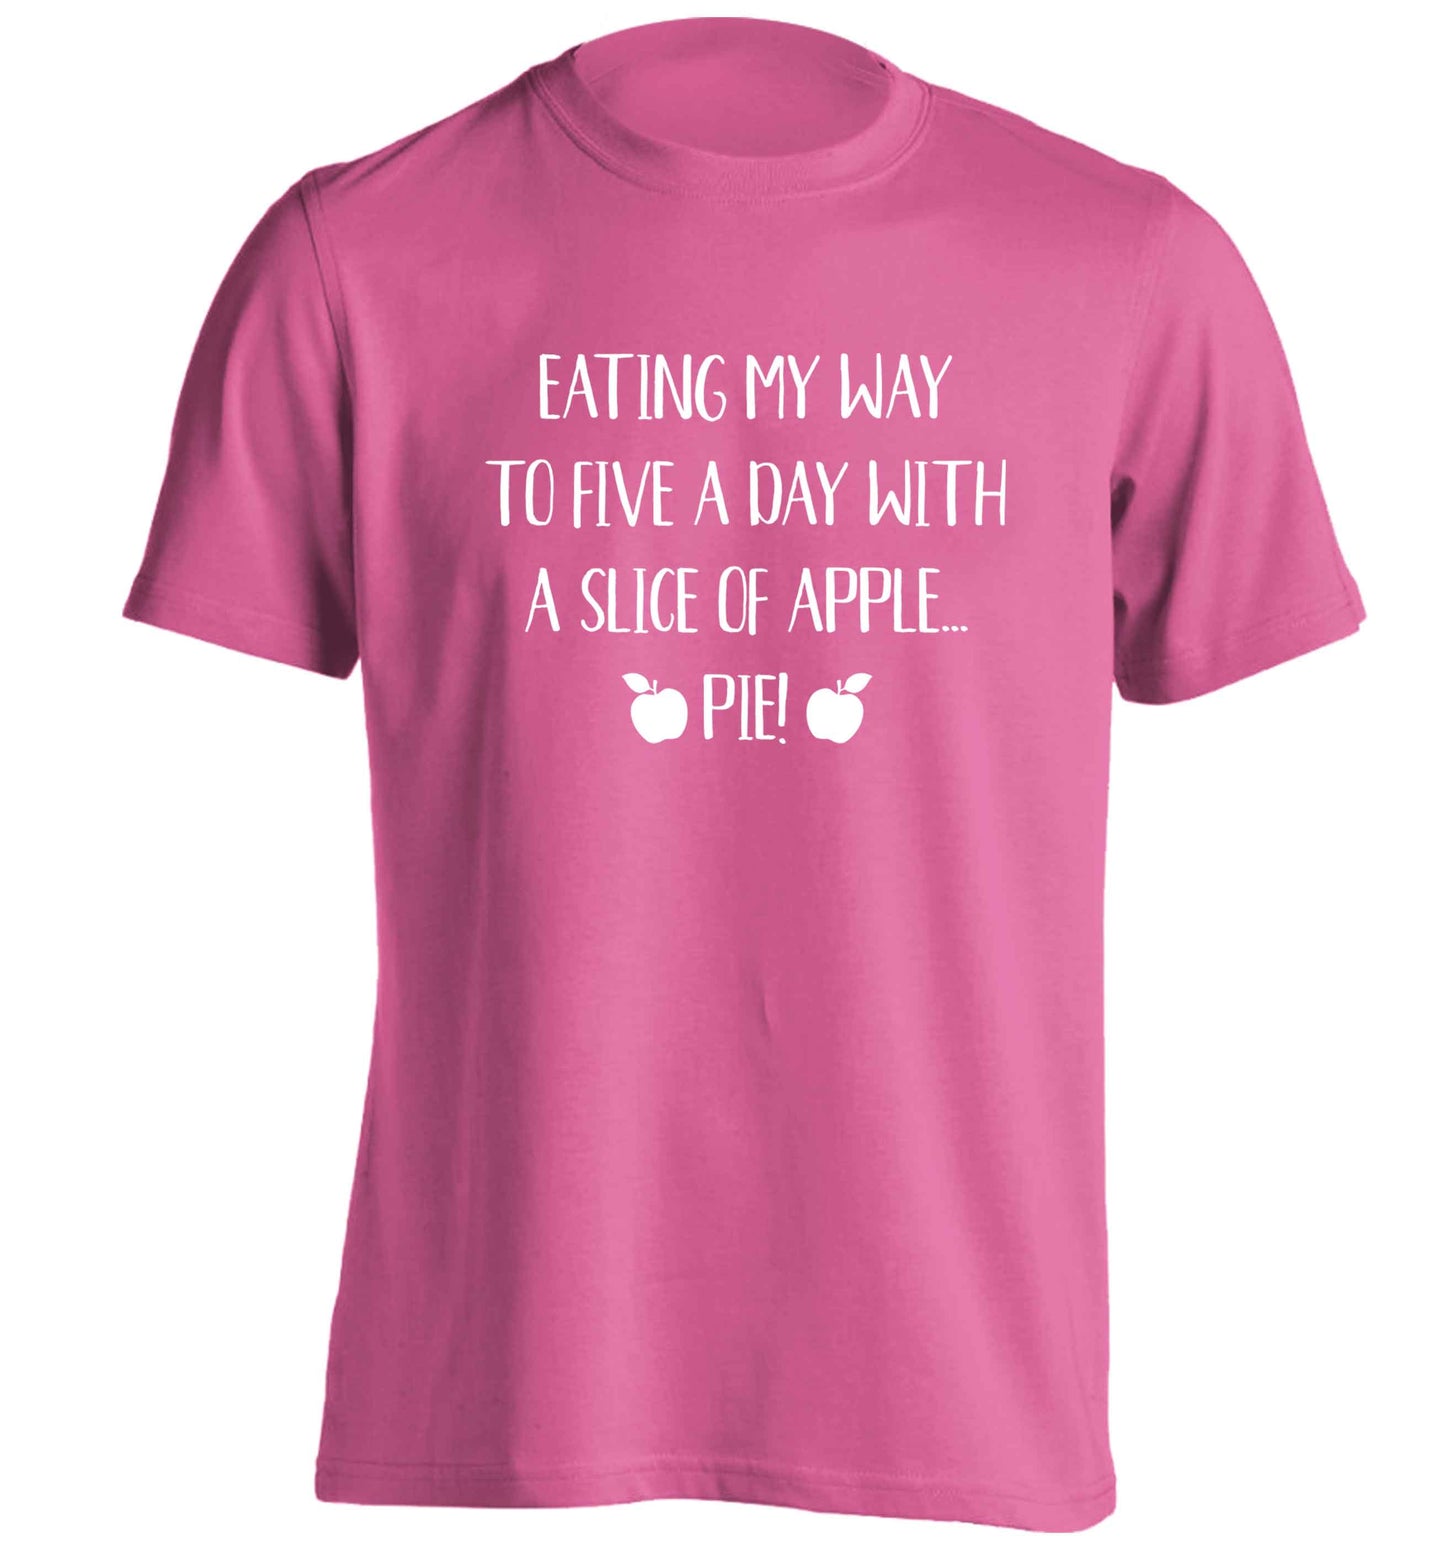 Eating my way to five a day with a slice of apple pie adults unisex pink Tshirt 2XL